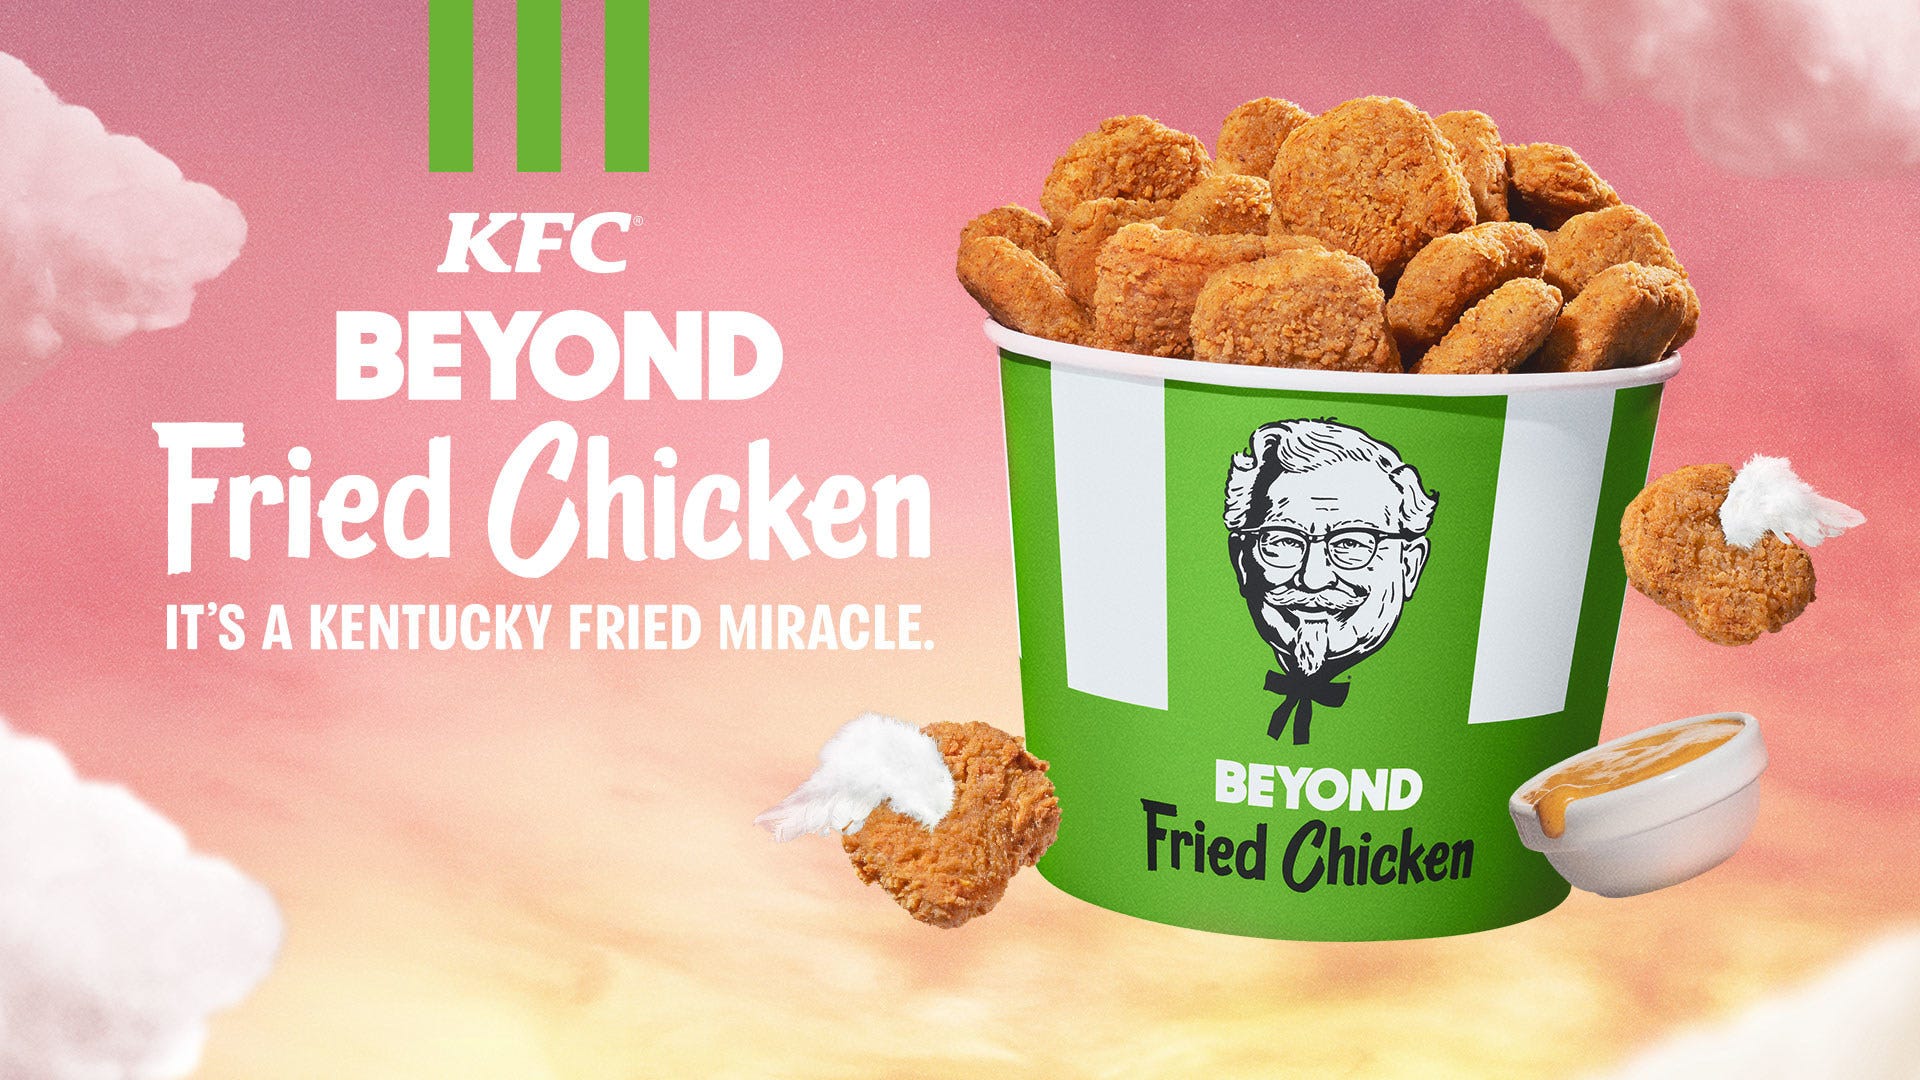 Advertisement showing KFC's Beyond Fried Chicken nuggets in a green KFC wings bucket.